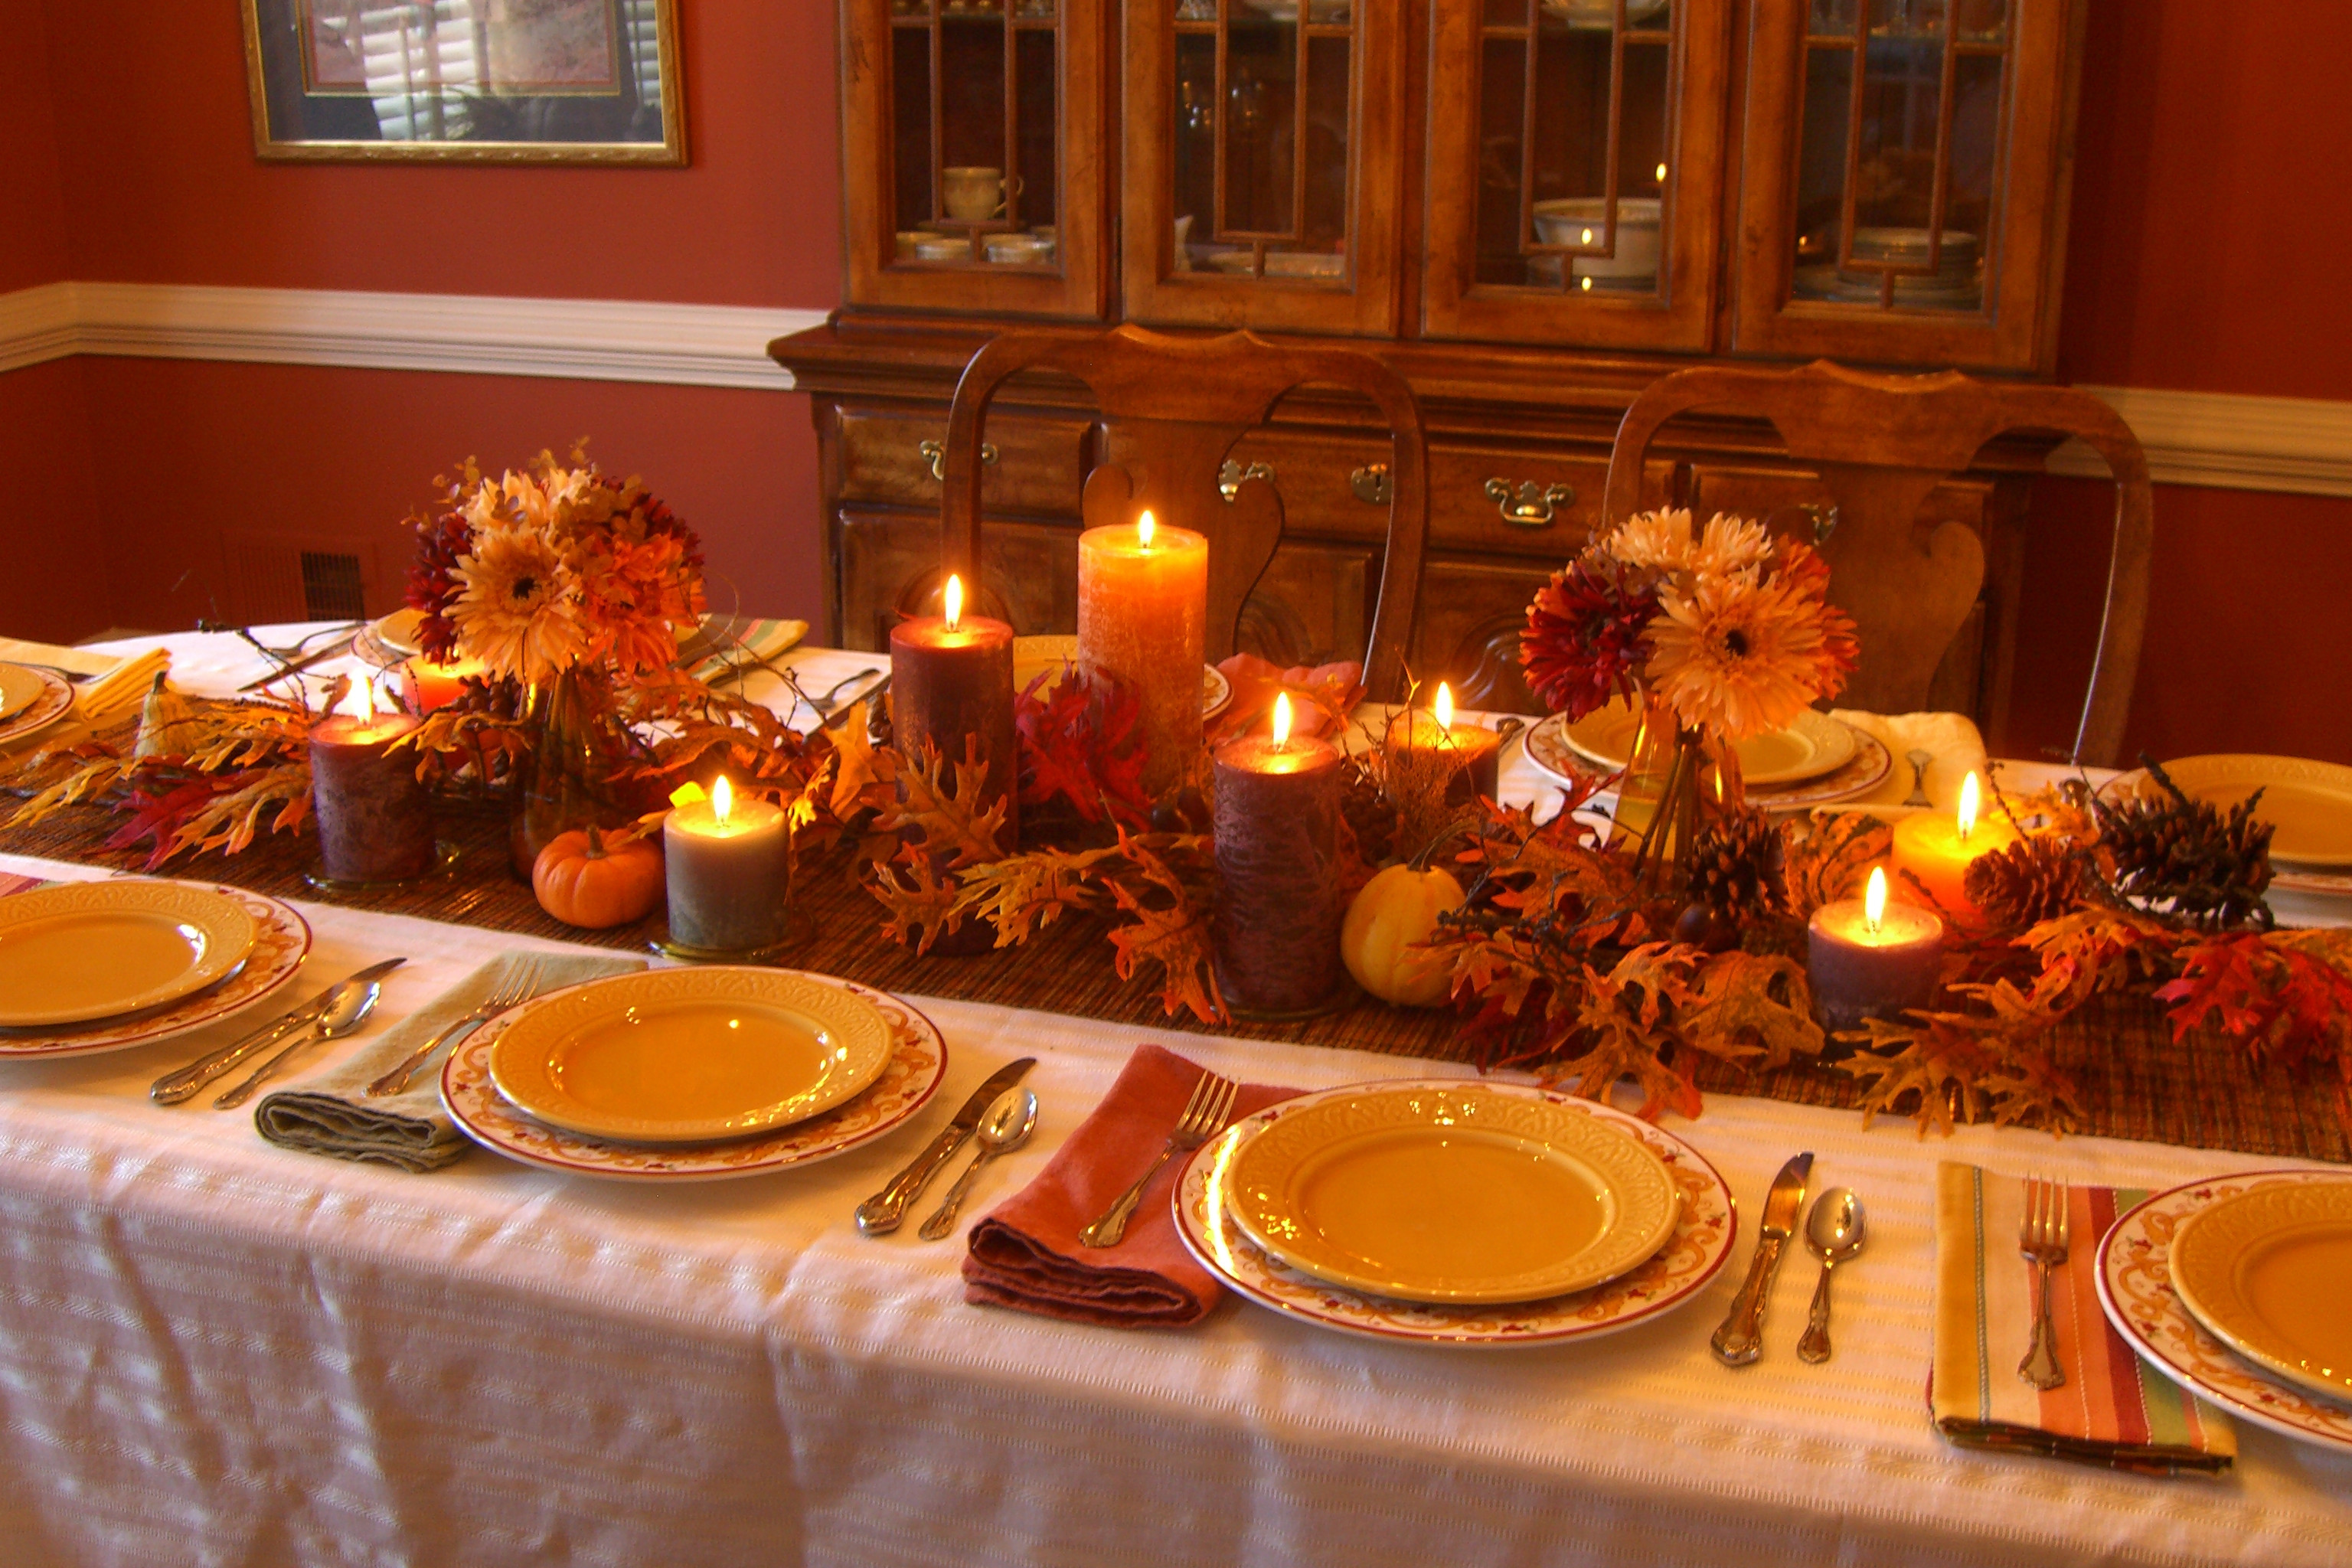 Thanksgiving Dinner Table Decorations
 Decorating My Thanksgiving Table